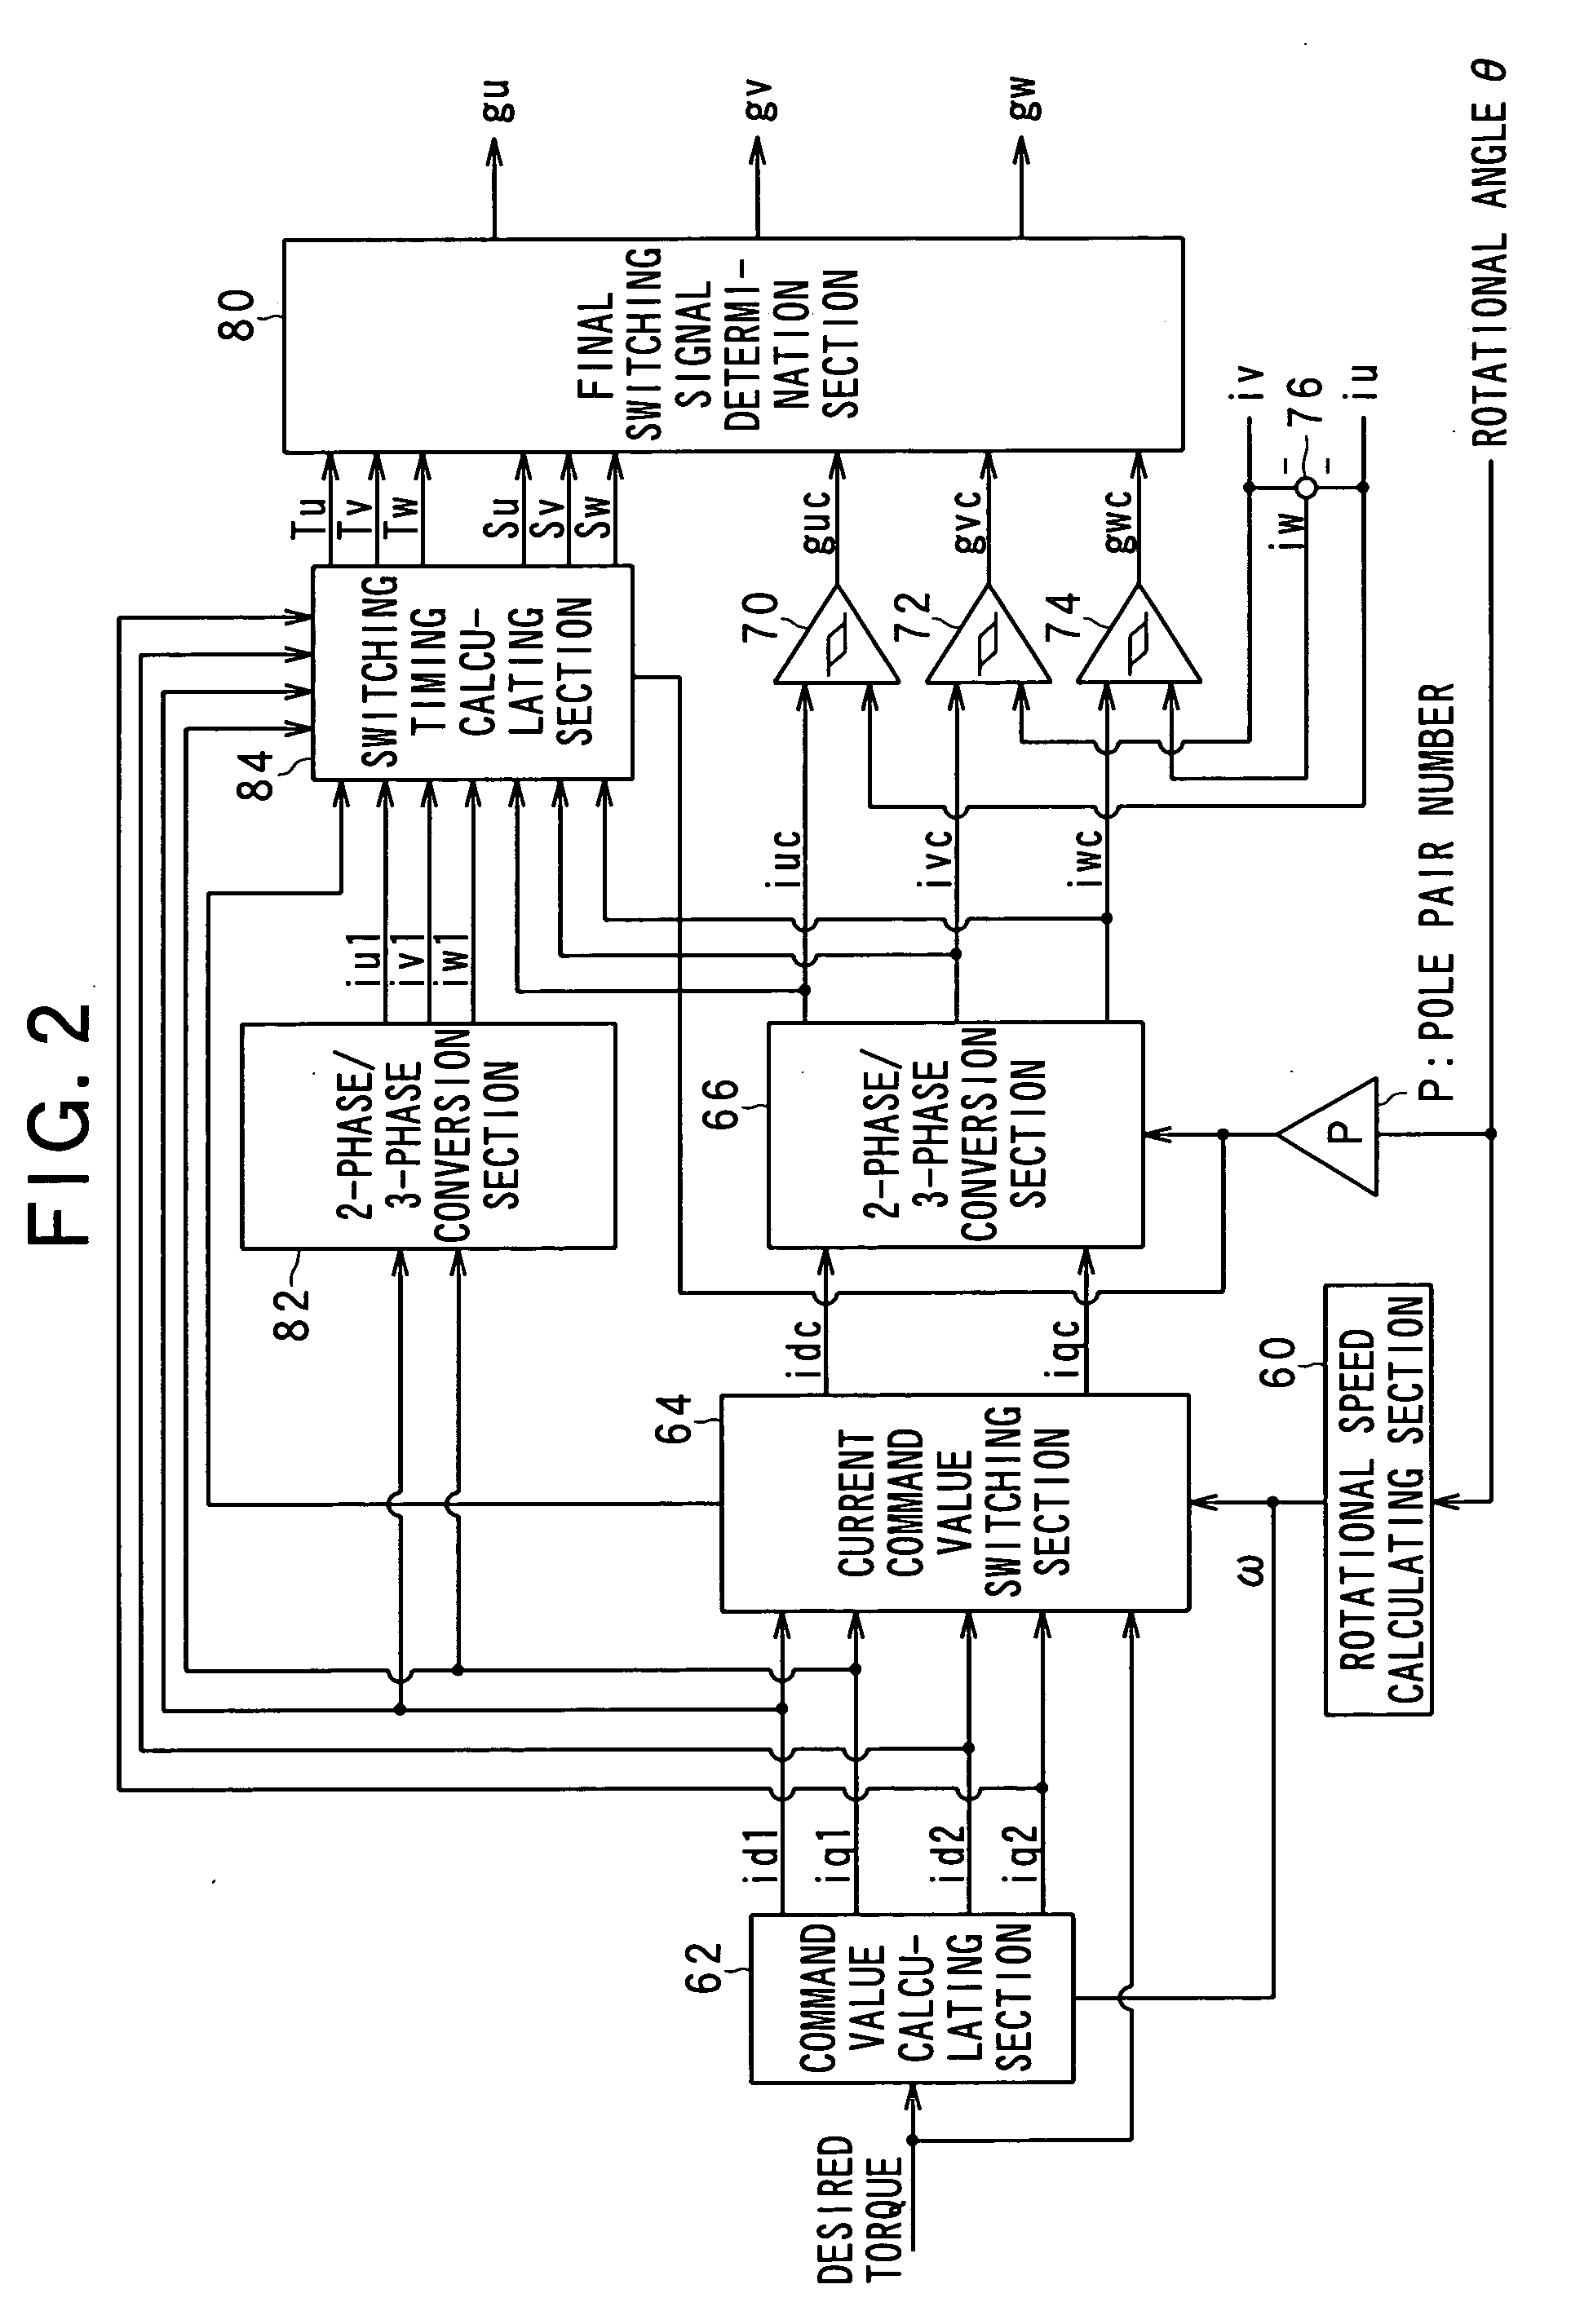 Rotating machinery controller